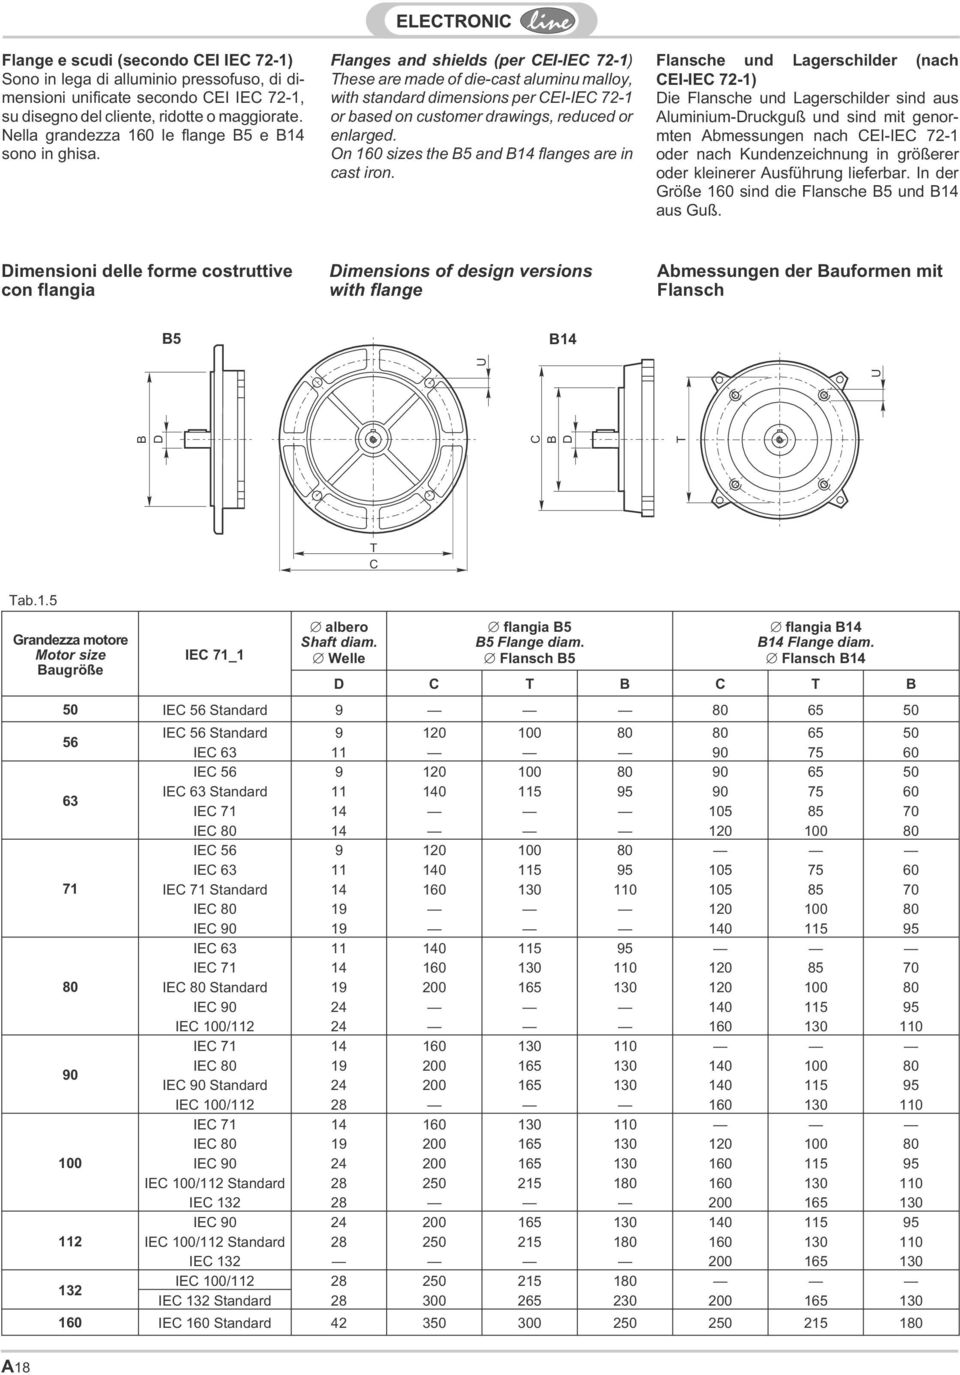 Flanges and shields (per CEI-IEC 72-1) These are made of die-cast aluminu malloy, with standard dimensions per CEI-IEC 72-1 or based on customer drawings, reduced or enlarged.